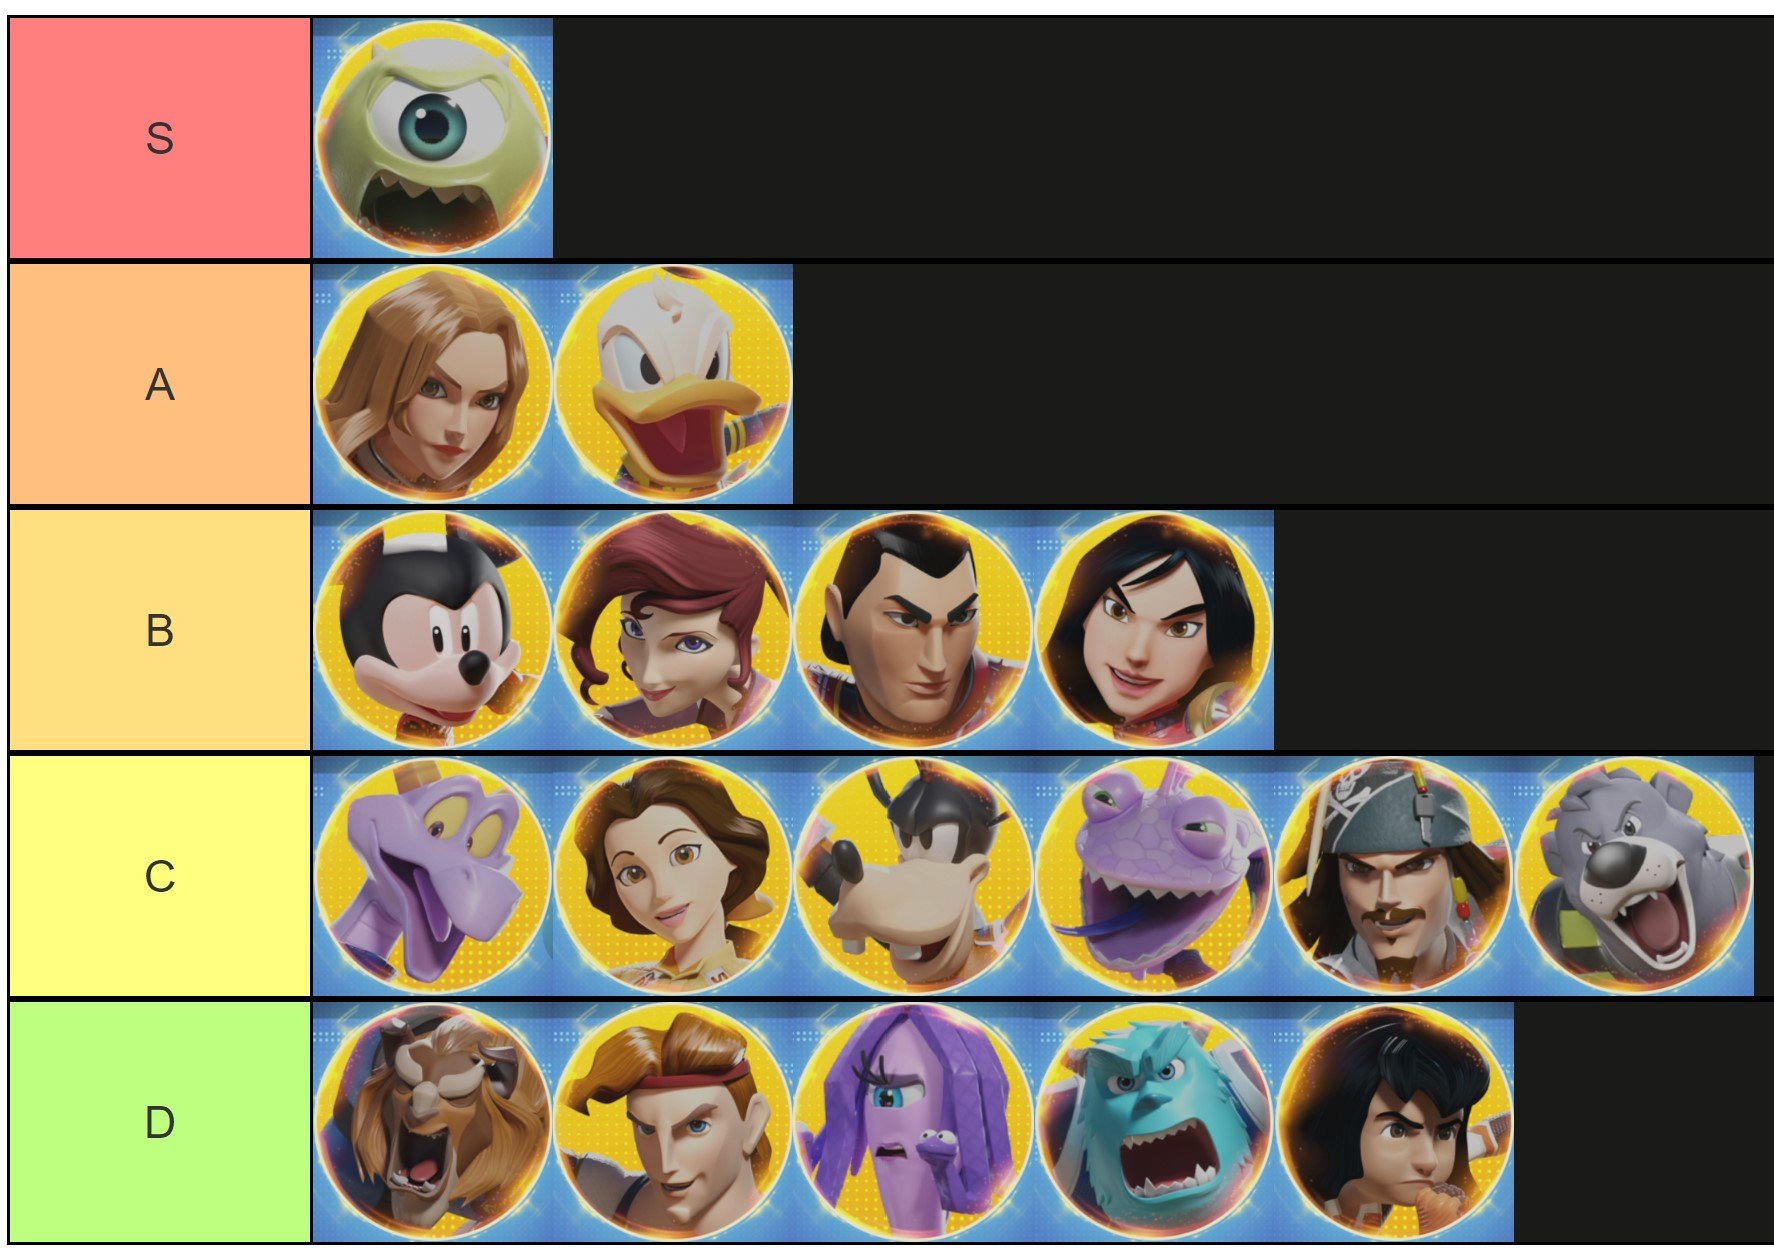 Can you make an anime tier list pls? (Mostly cause I want to know